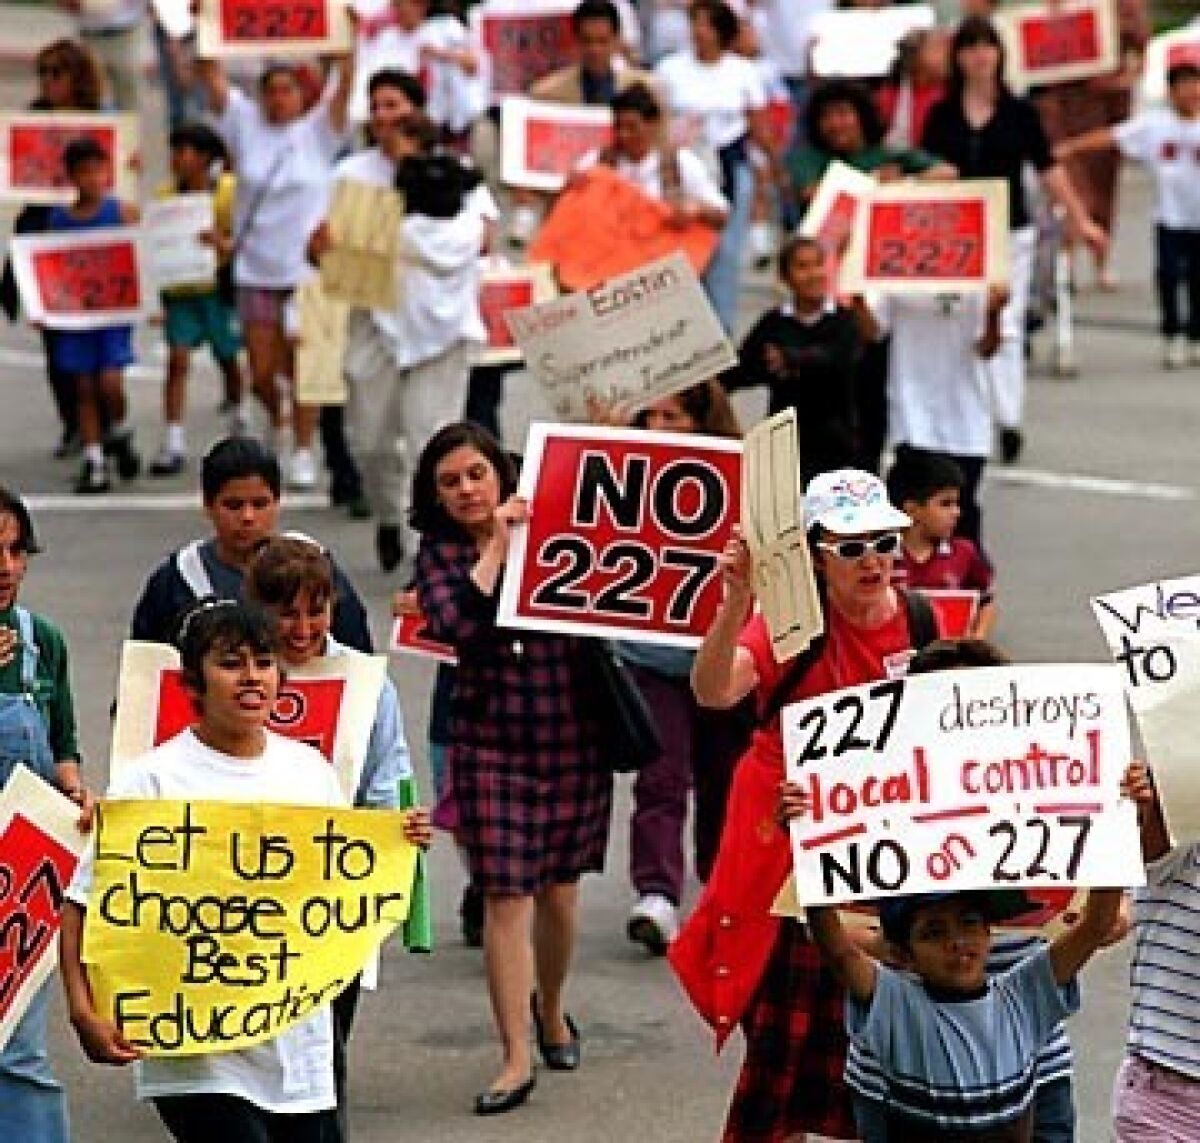 A protest march against Prop. 227